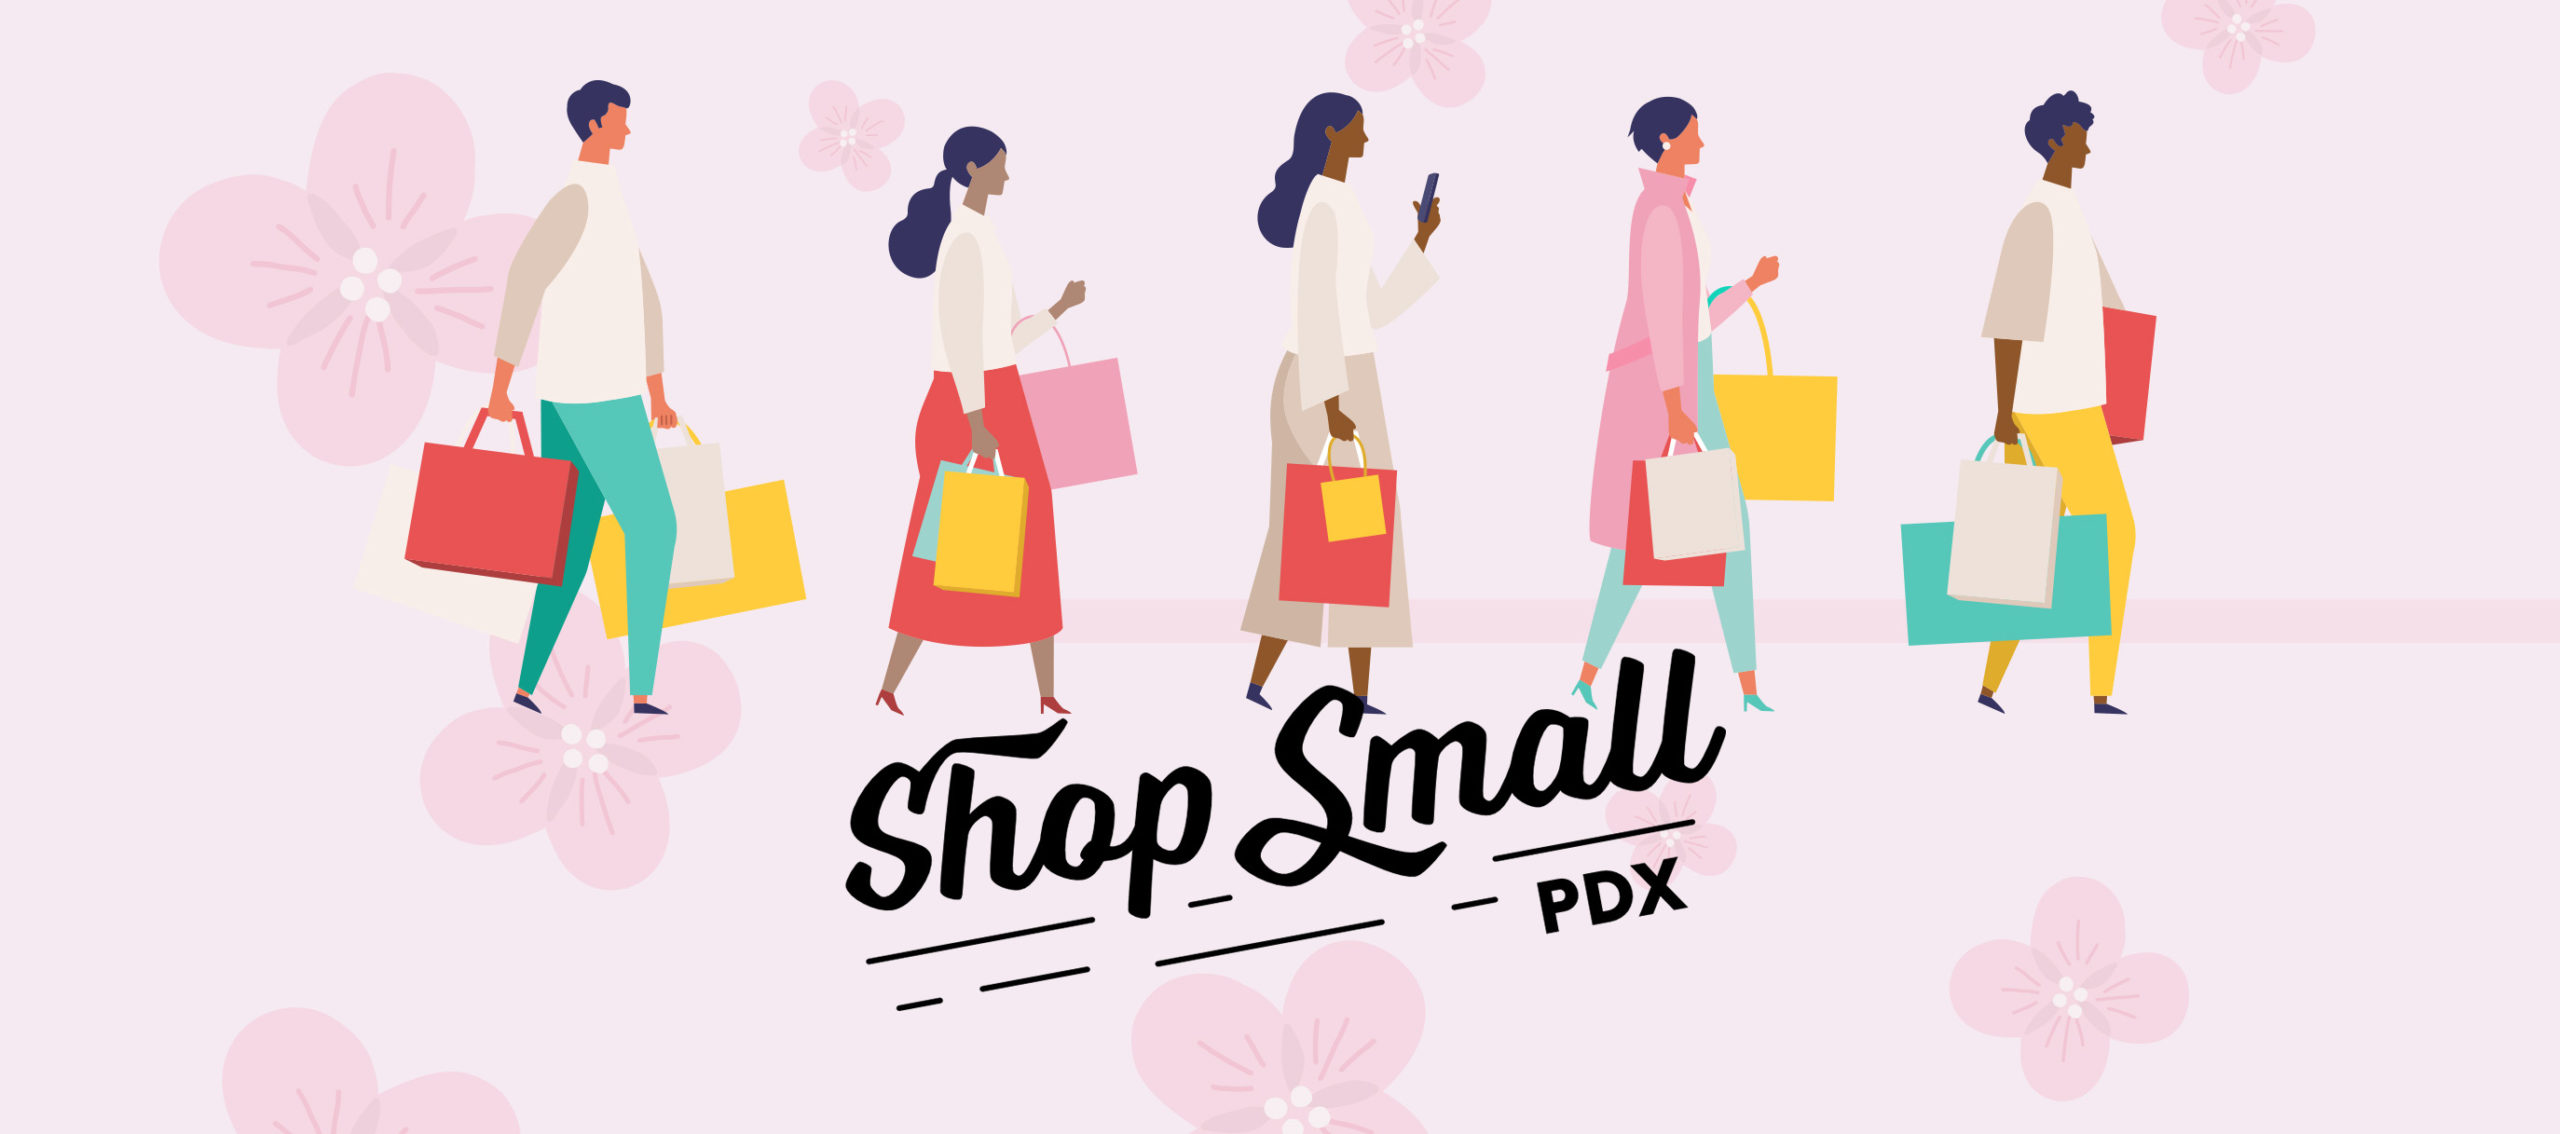 Shop Small PDX spring banner